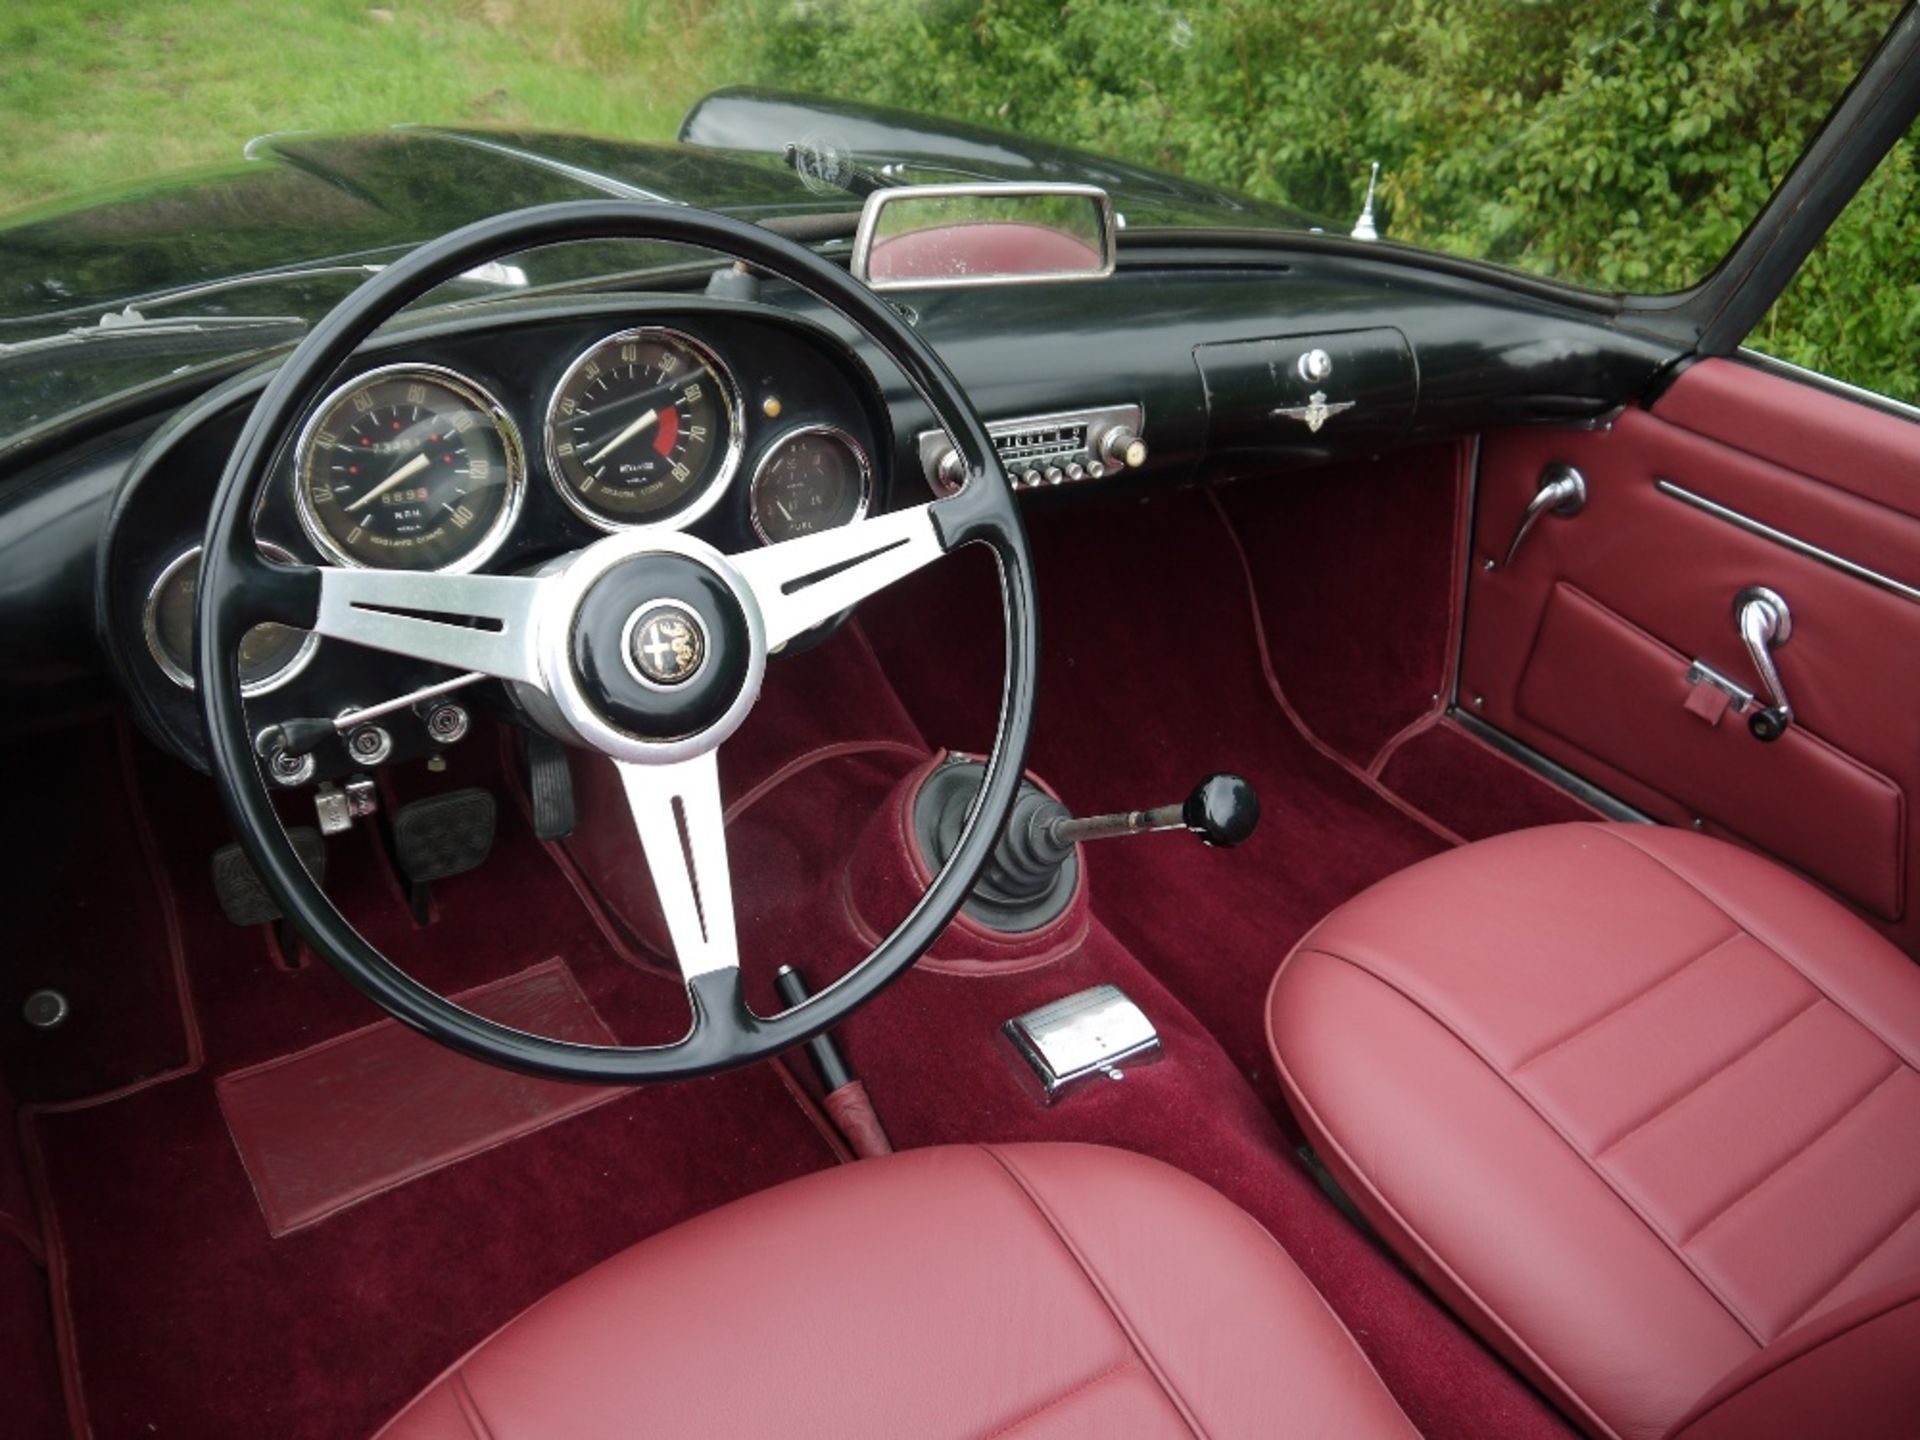 1960 ALFA ROMEO TOURING SPIDER Registration Number: 307 XVJ Chassis Number: AR*10204*000517 Recorded - Image 22 of 36